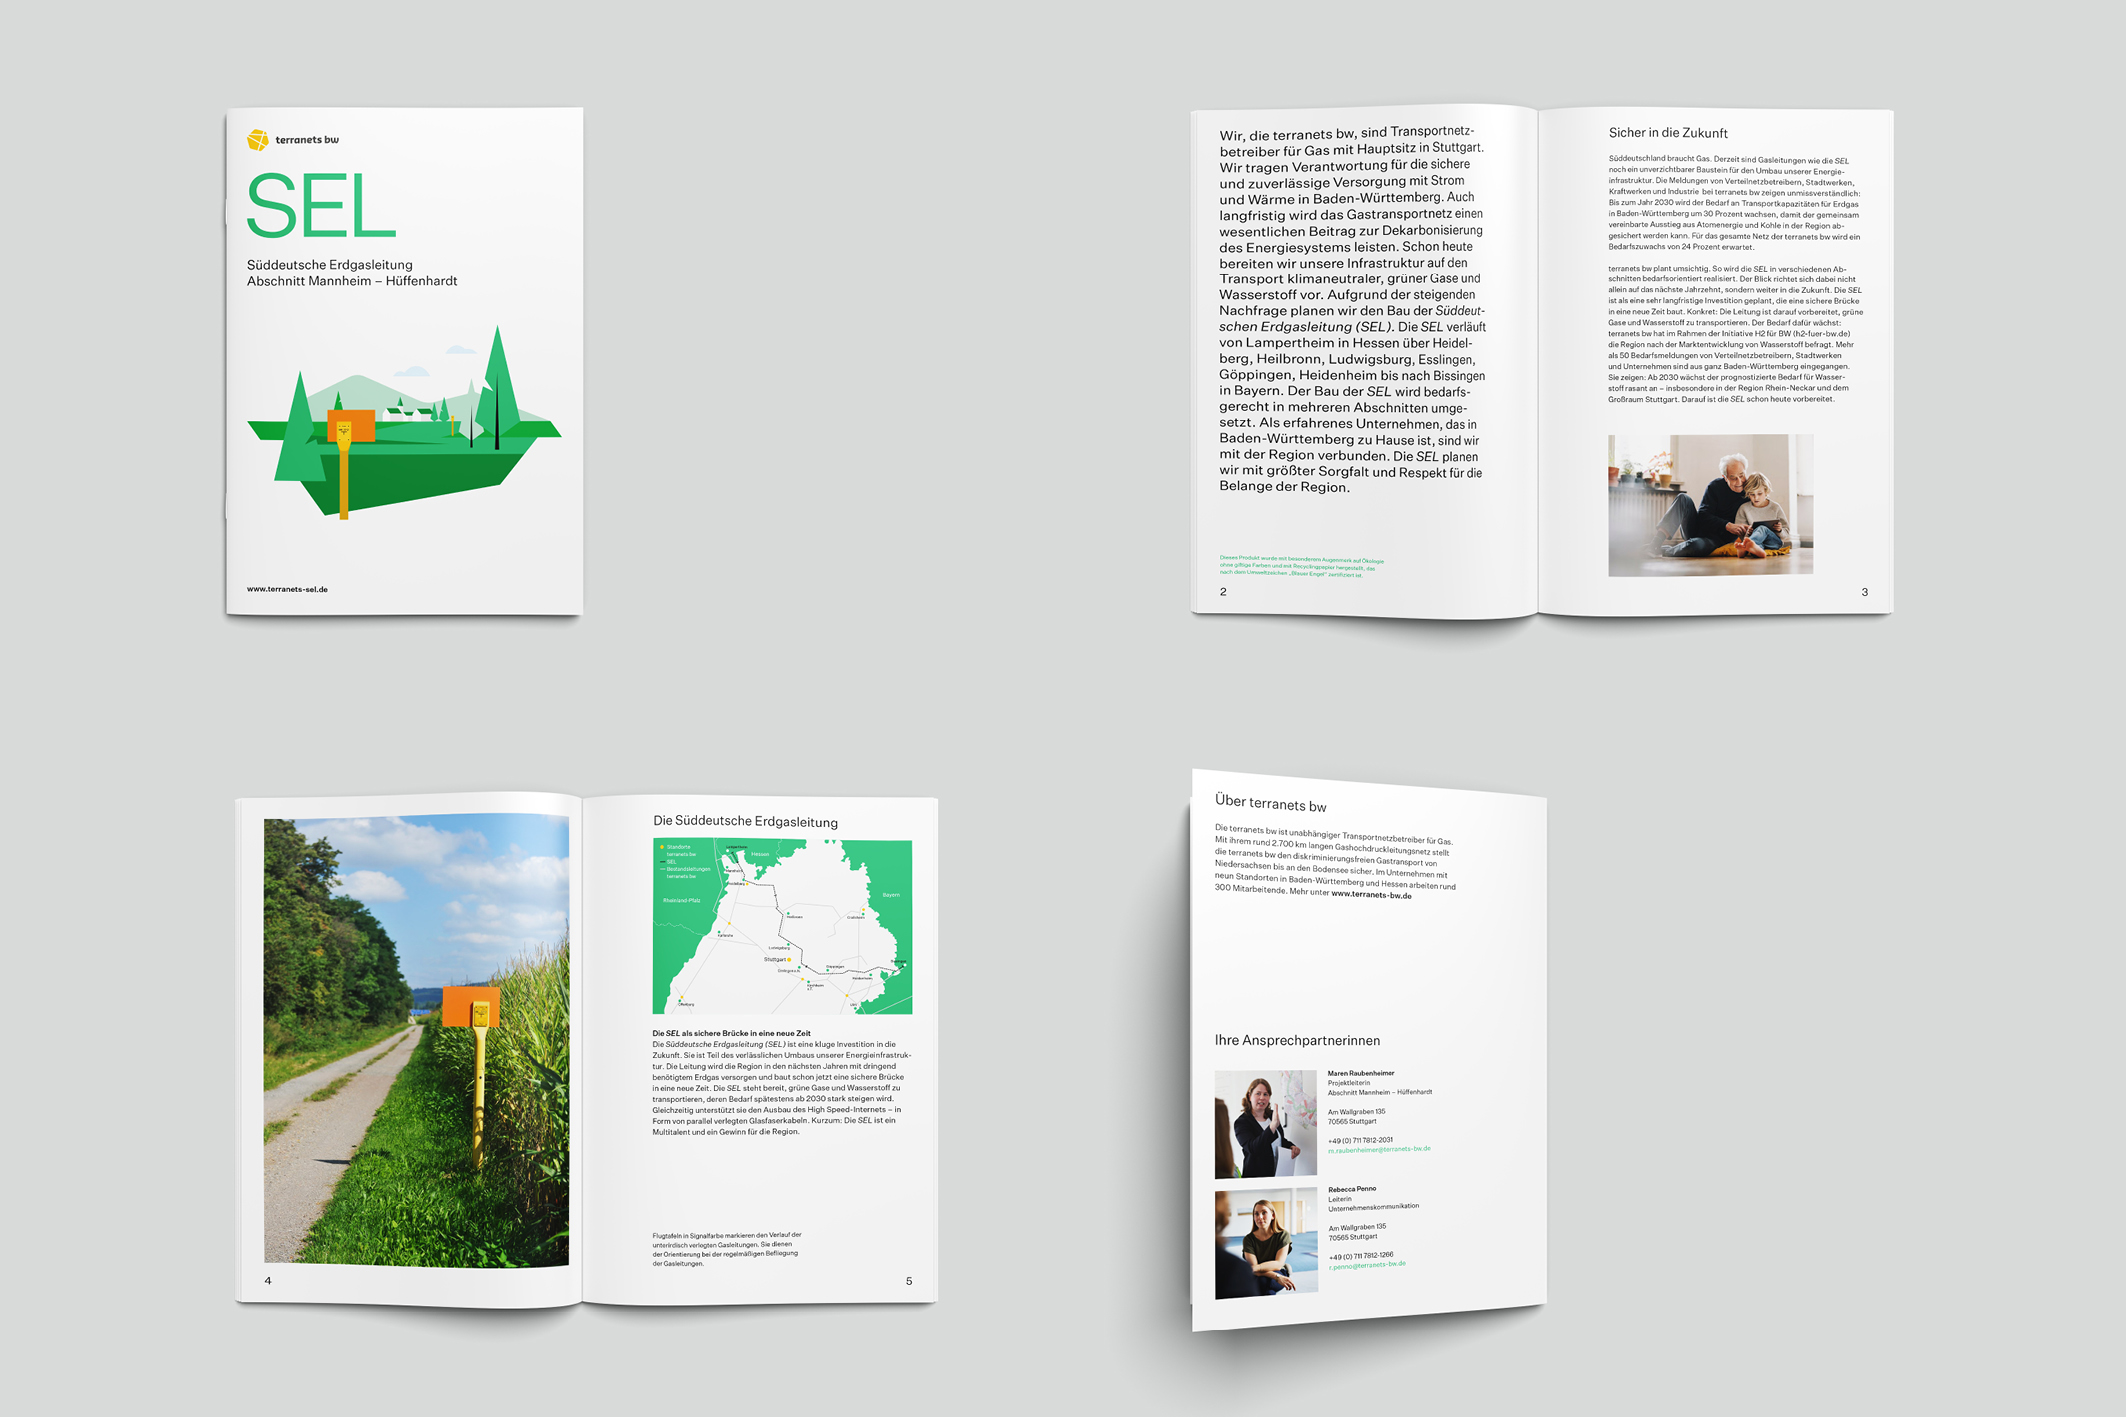 SEL brochure images on gray background. SEL stands for Süddeutsche Erdgasleitung (South German natural gas pipeline).